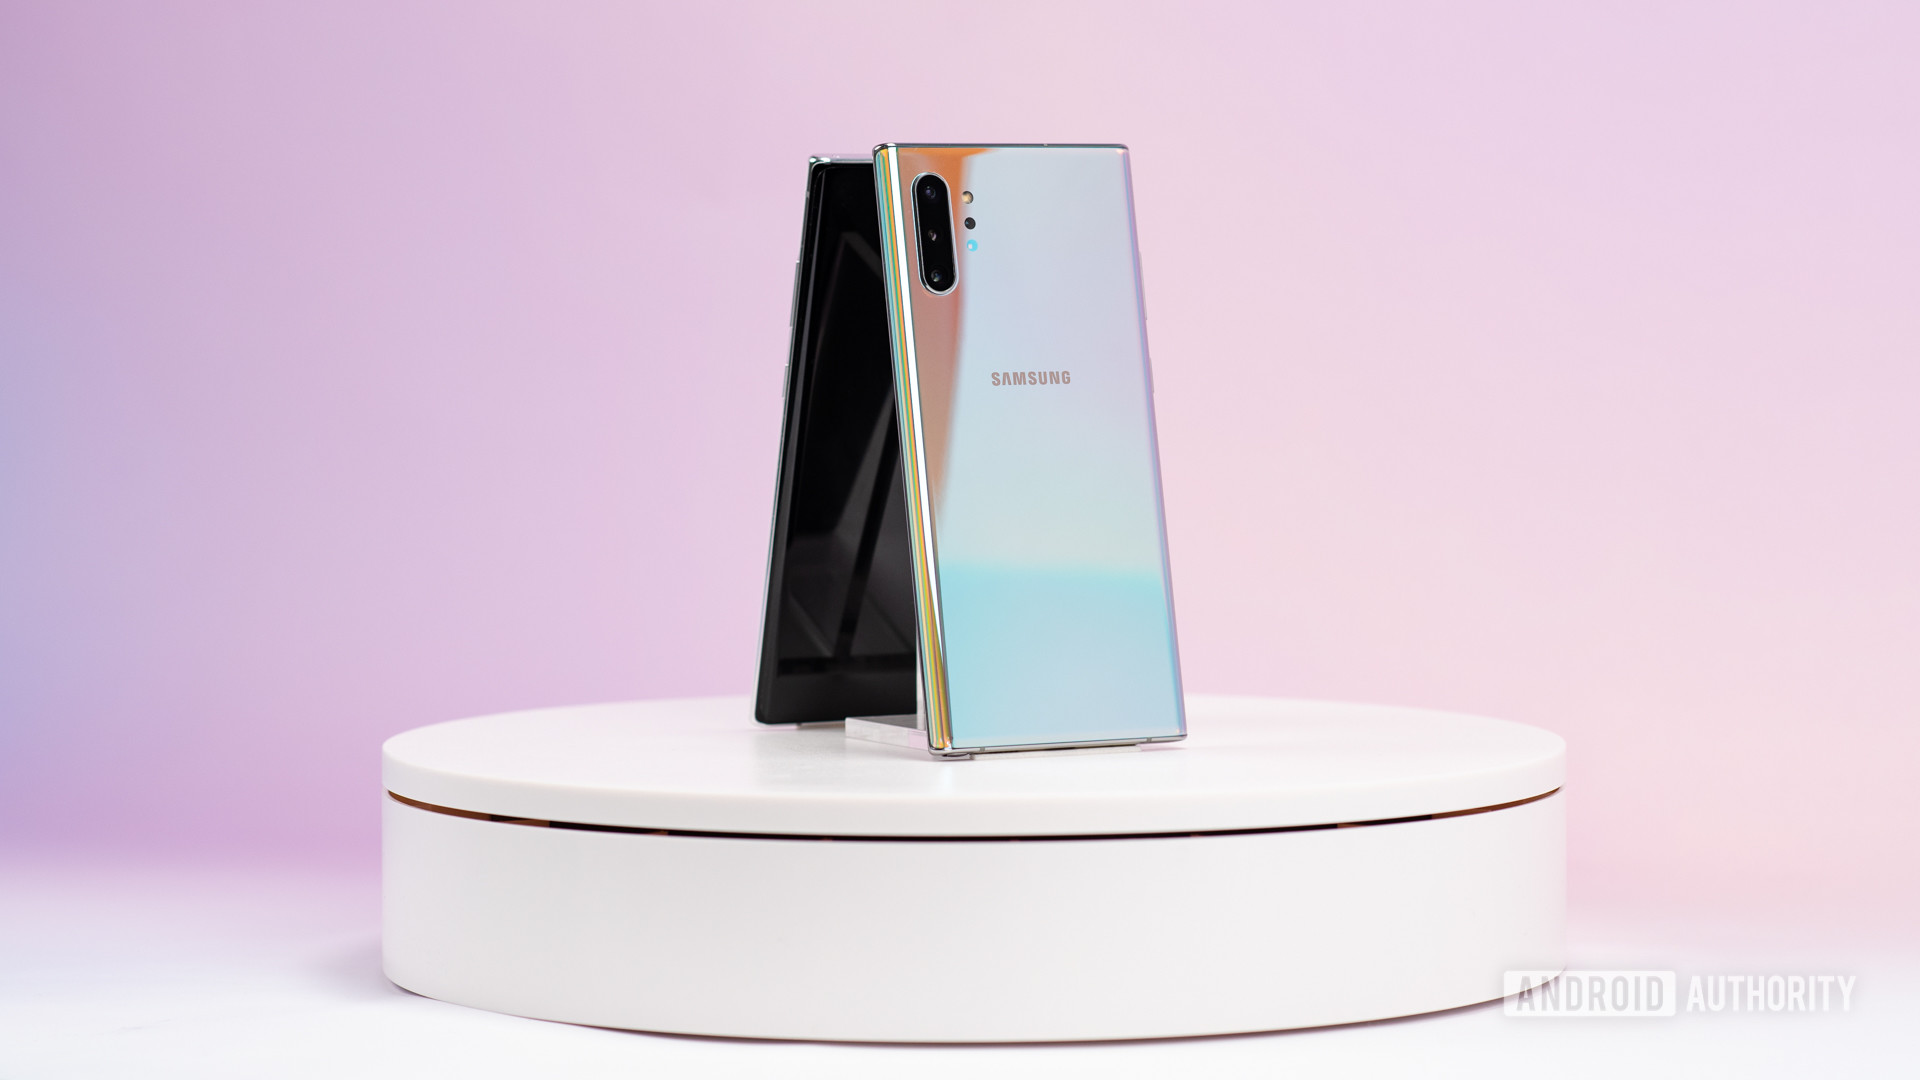 Samsung Galaxy Note 10 Vs Galaxy S10 Plus Which Should You Buy